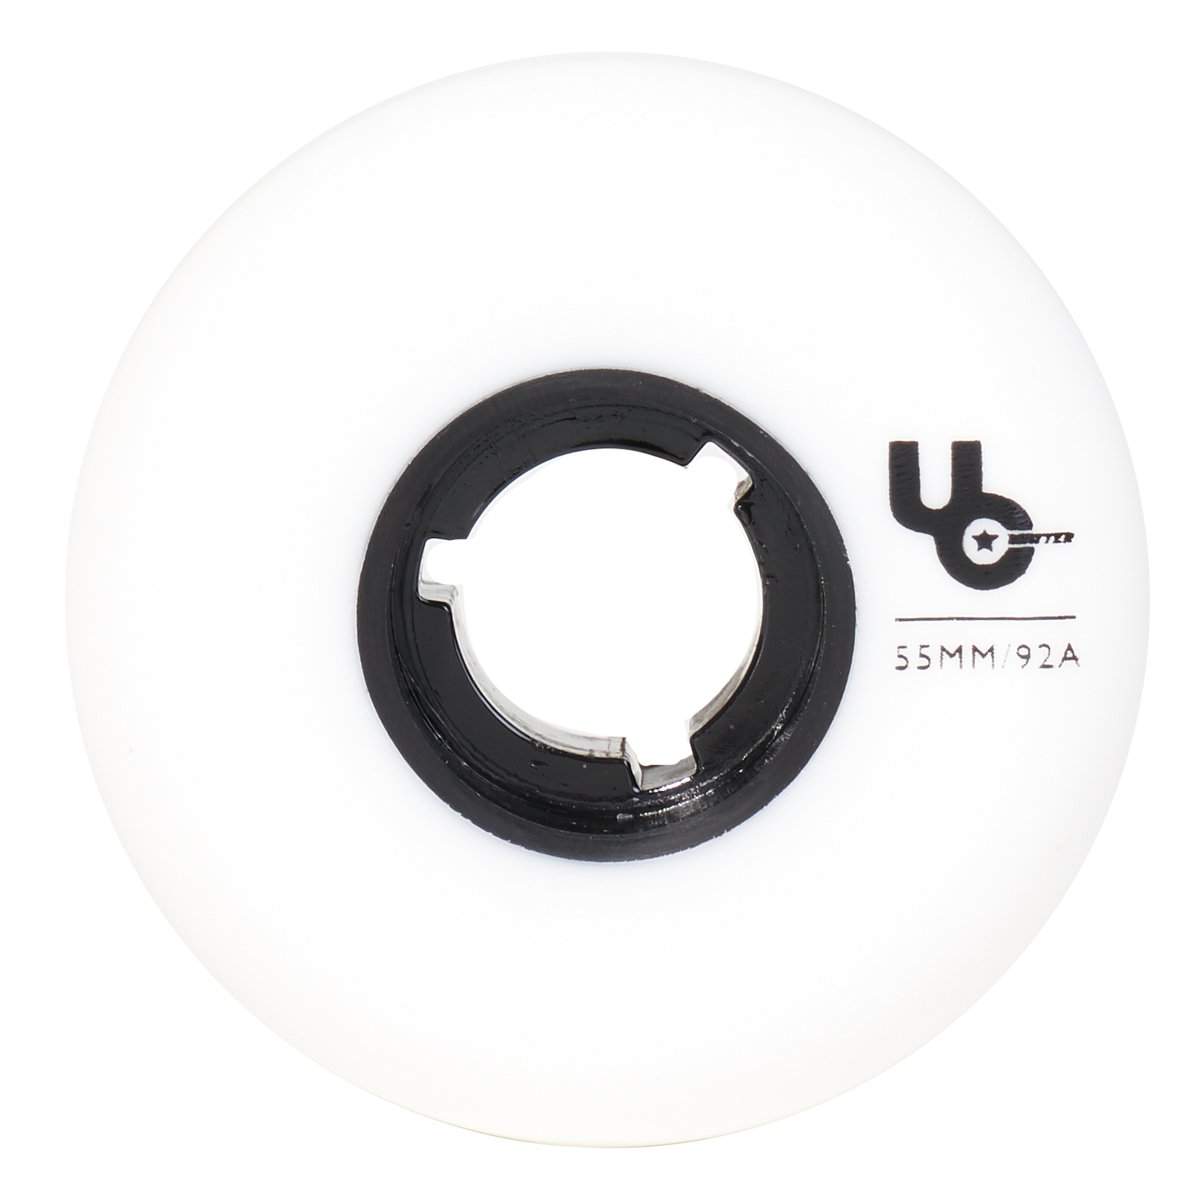 Undercover Team Wheels 55mm / 92a - White